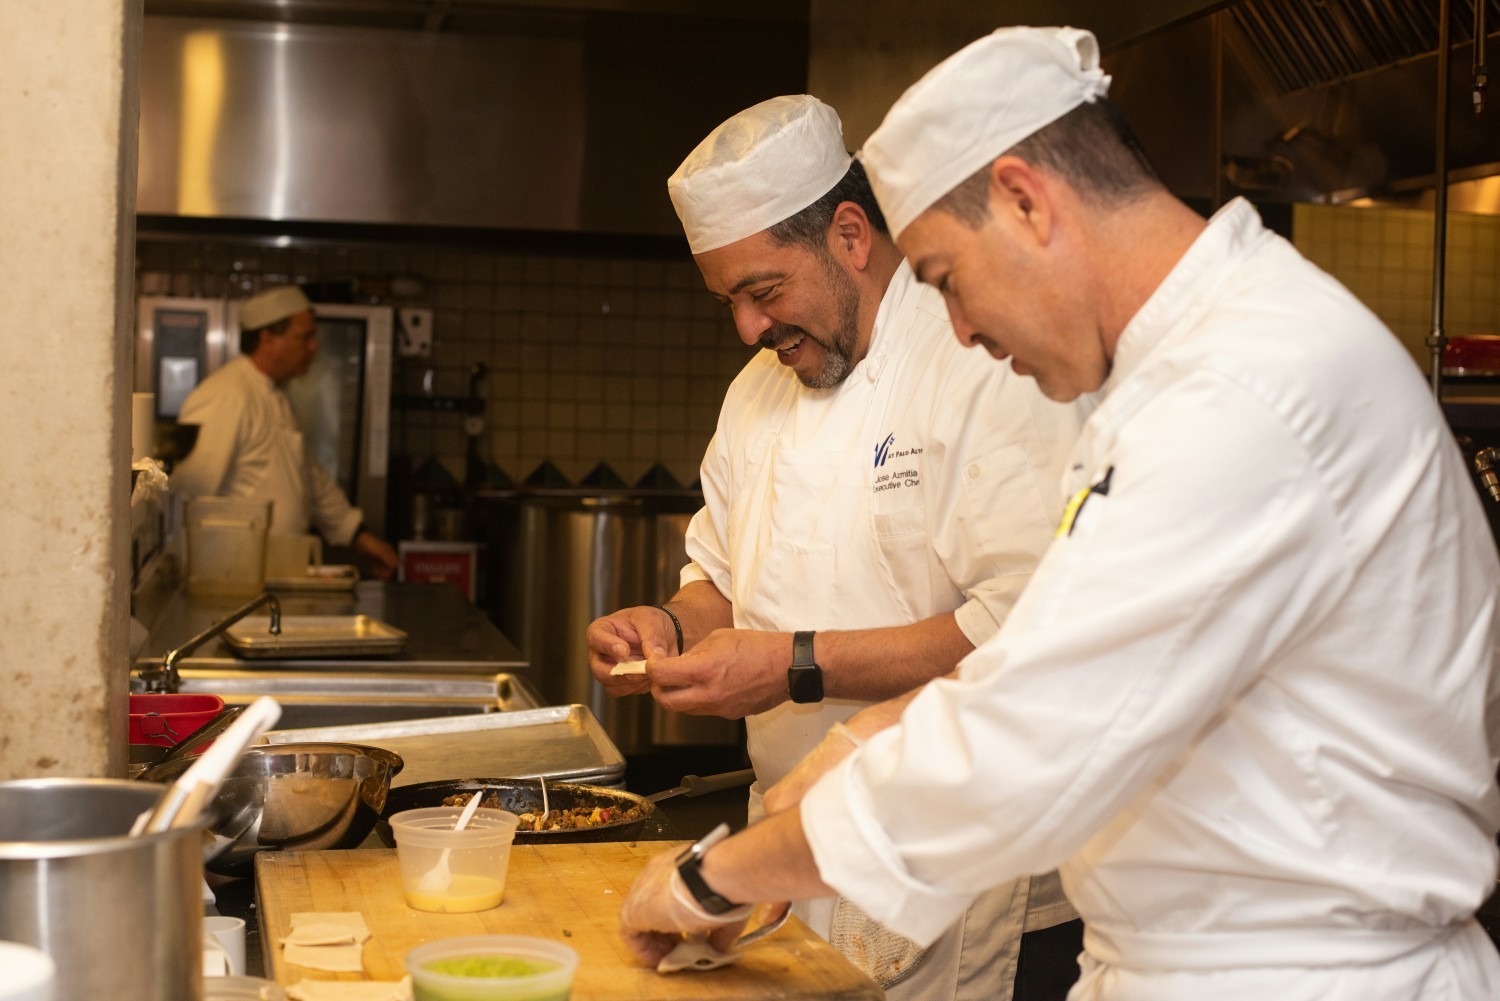 Vi's communities feature world-class chefs and culinary teams. They can access training to advance in their careers.